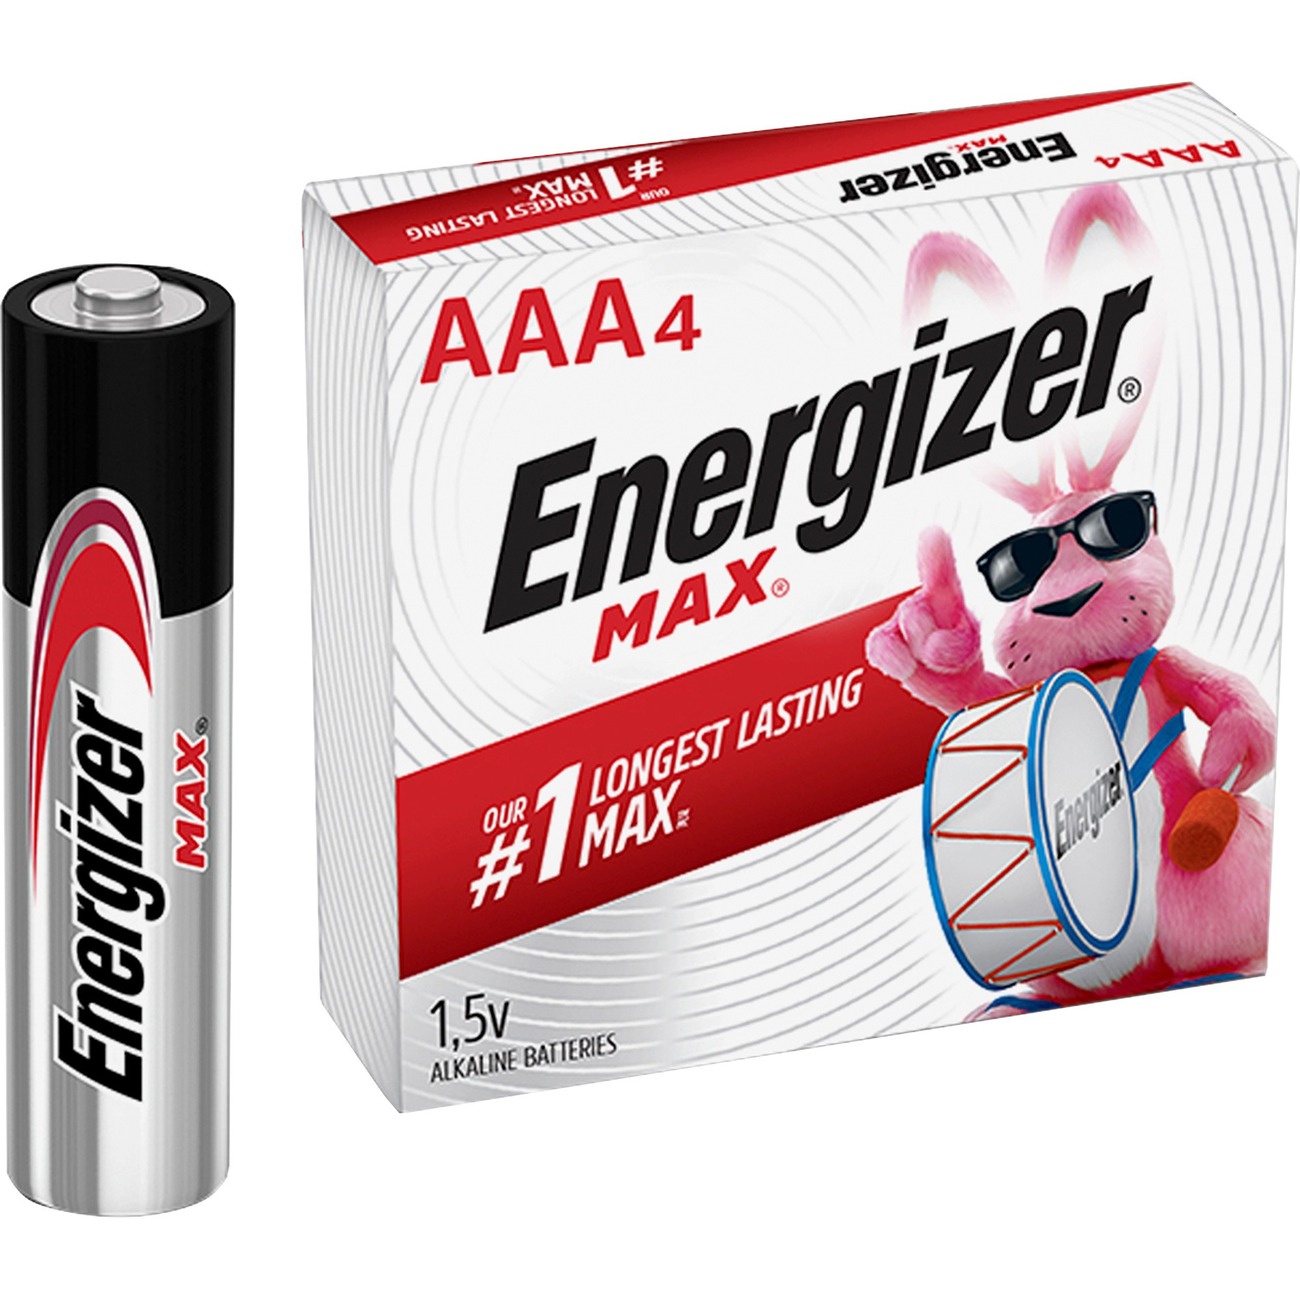 Energizer Max Alkaline AAA Batteries - For Multipurpose, EVEE92, EVE E92 -  Office Supply Hut